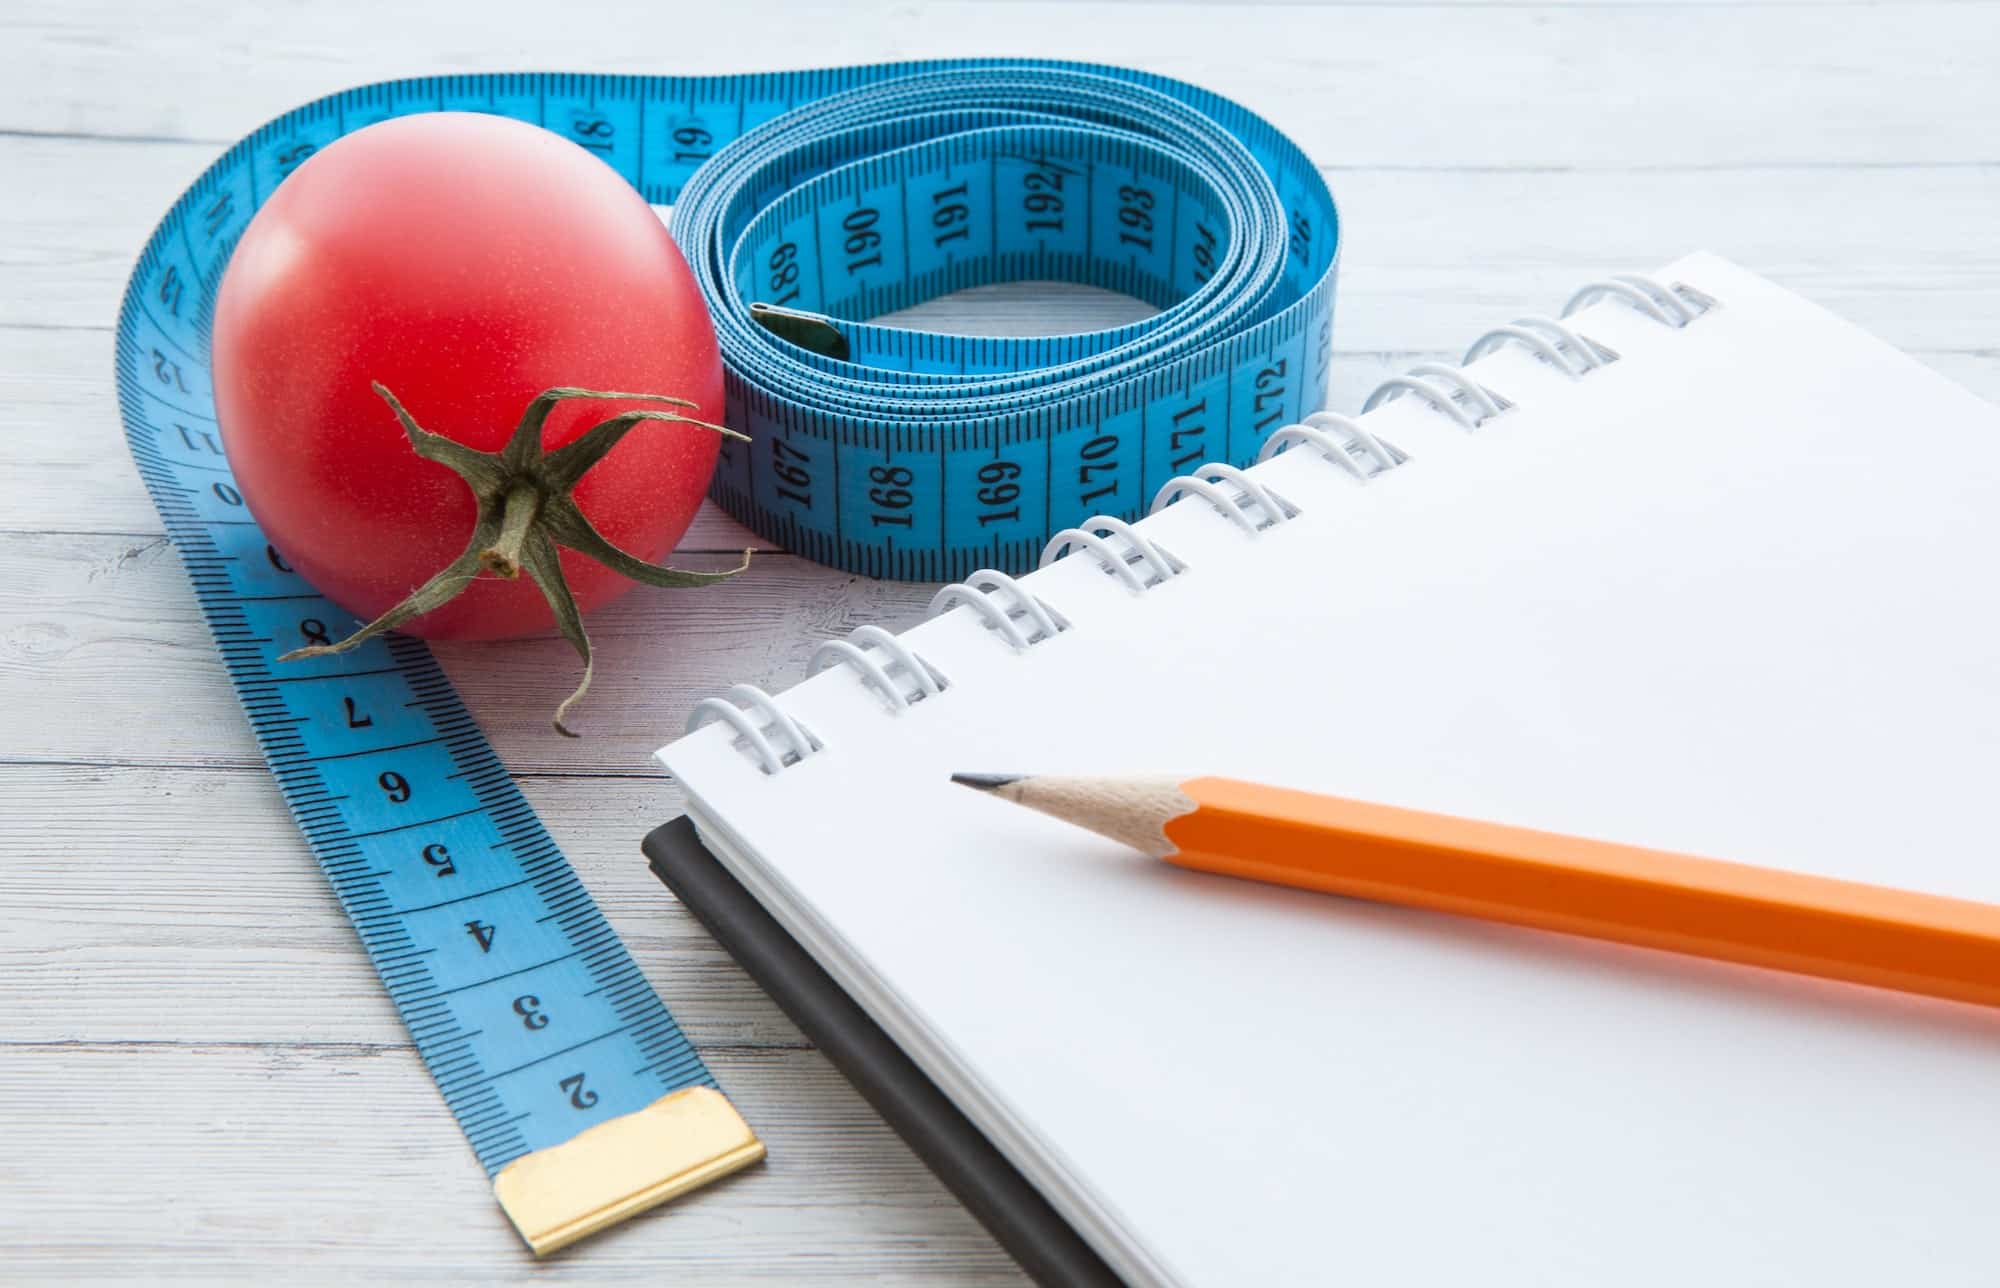 Measuring tape and notebook with juicy tomatoes, the concept of healthy eating and losing weight